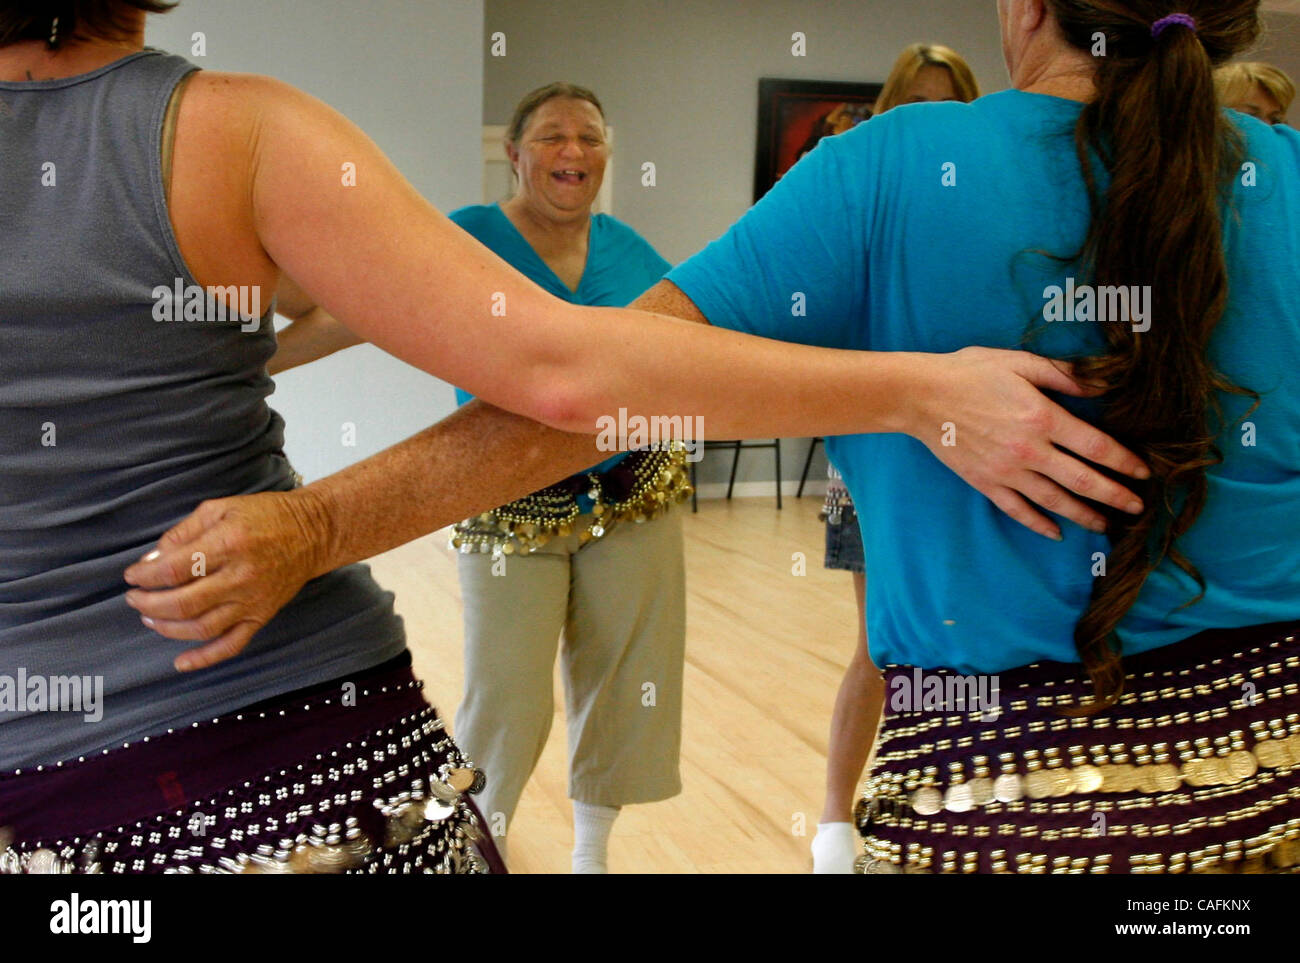 CAPTION: PHOTO 2:  (Hudson, 01/12/2008)  Kathy Bostick (center) is reflected in the mirror during Jackie Pearce's  beginning belly dancing class at Dancingly Yours on US Highway 19 in Hudson on Saturday, 1/12/08. For more information check their website www.dancingly-yours.com.  LANCE ARAM ROTHSTEIN Stock Photo